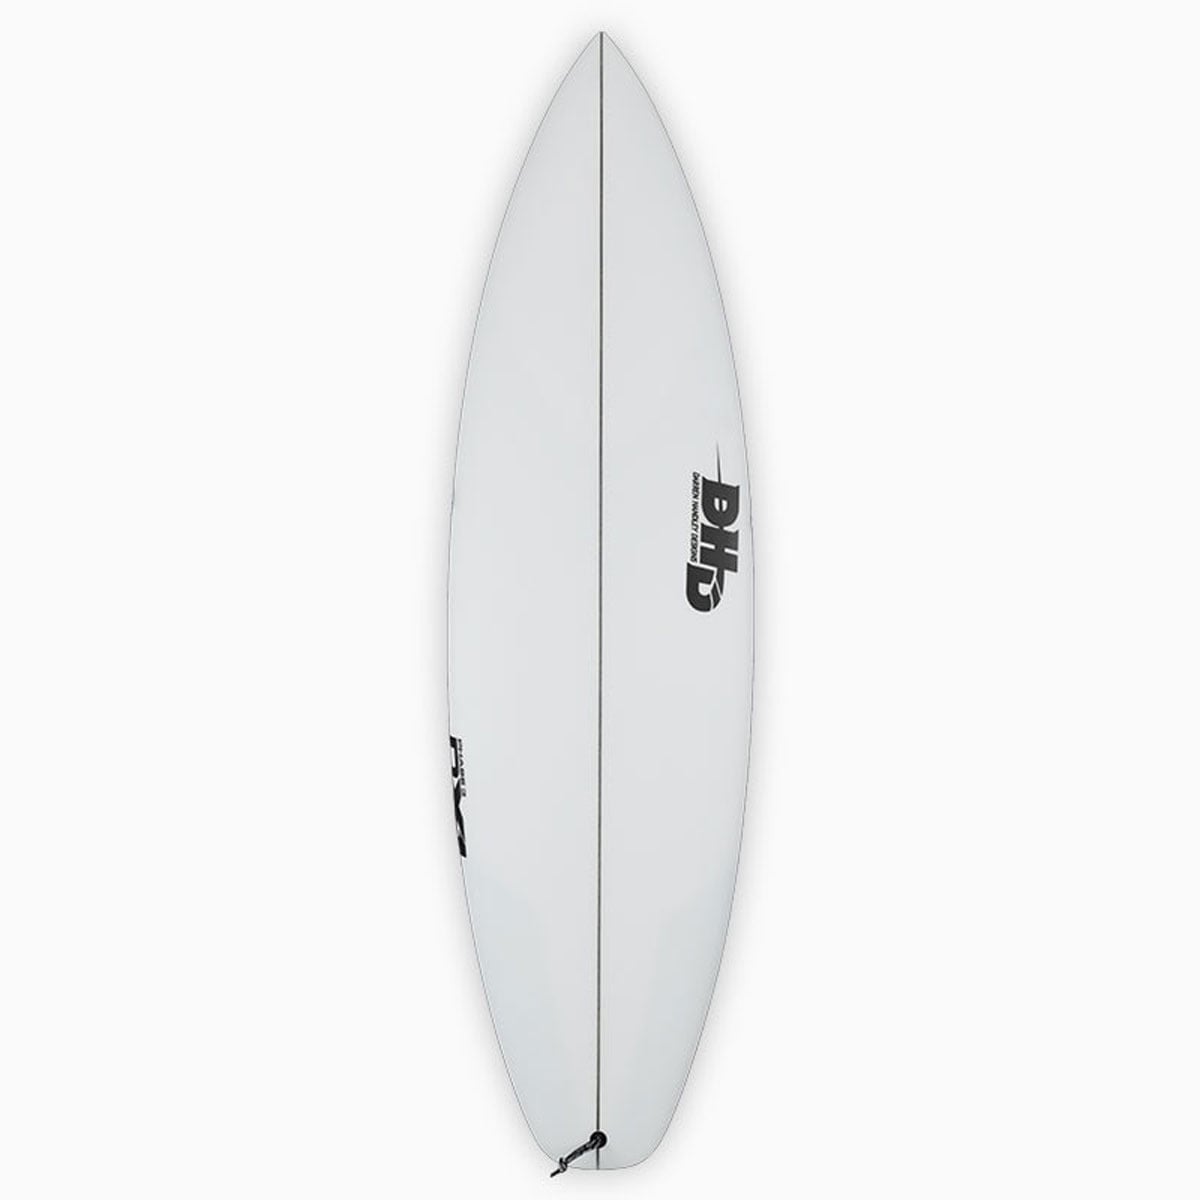 DHD SURFBOARDS DX1 PHASE3 ダレンハンドレーデザイン ディーエックス1 フェーズ3 ショートボード パフォーマンスショート  FCS2 サーフボード トライフィン クリア 5.11